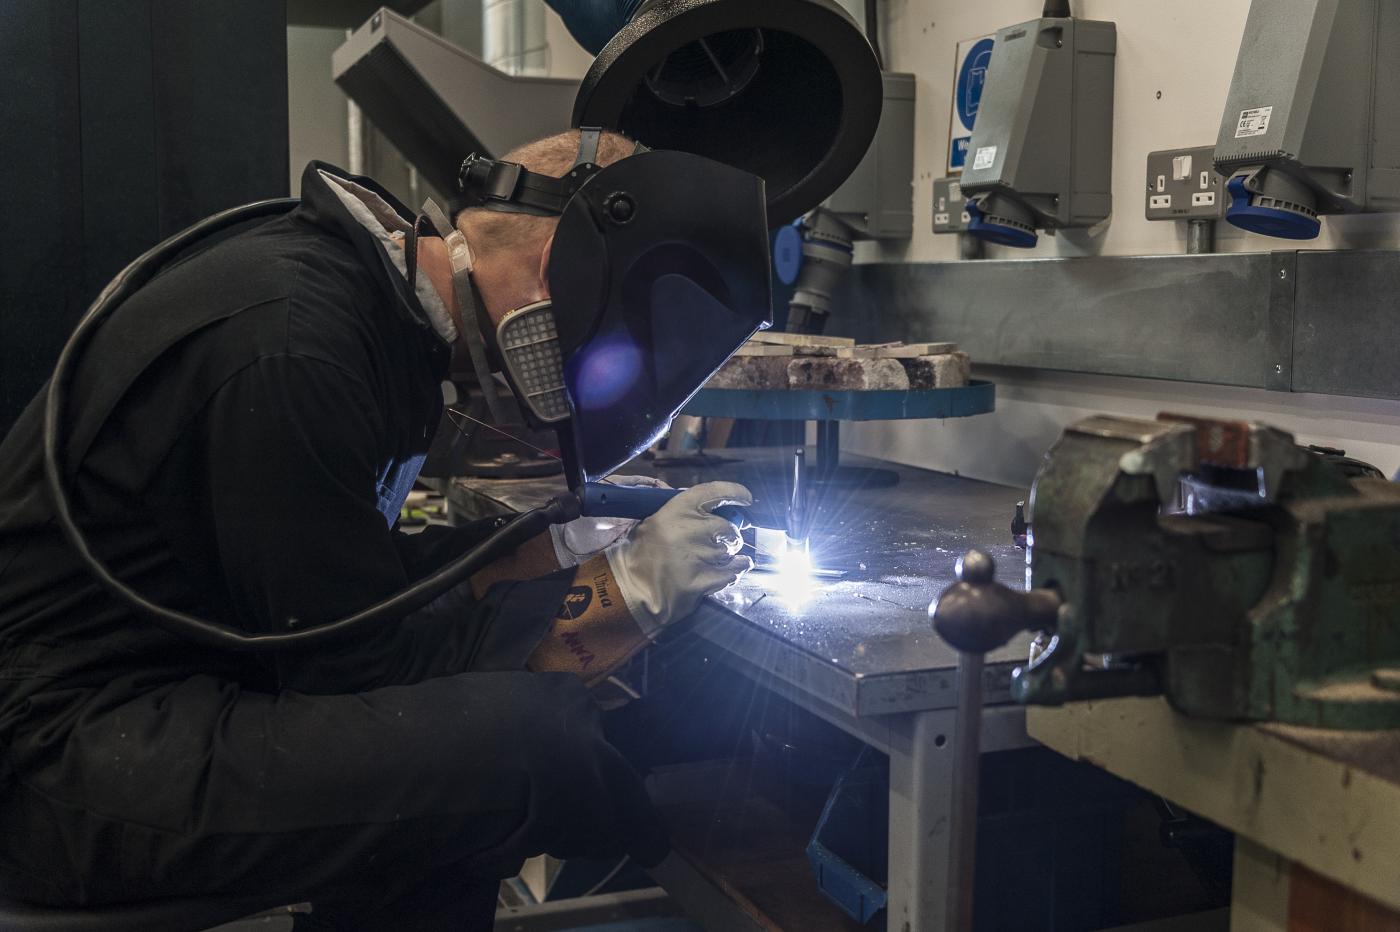 An image showing 'Welding'